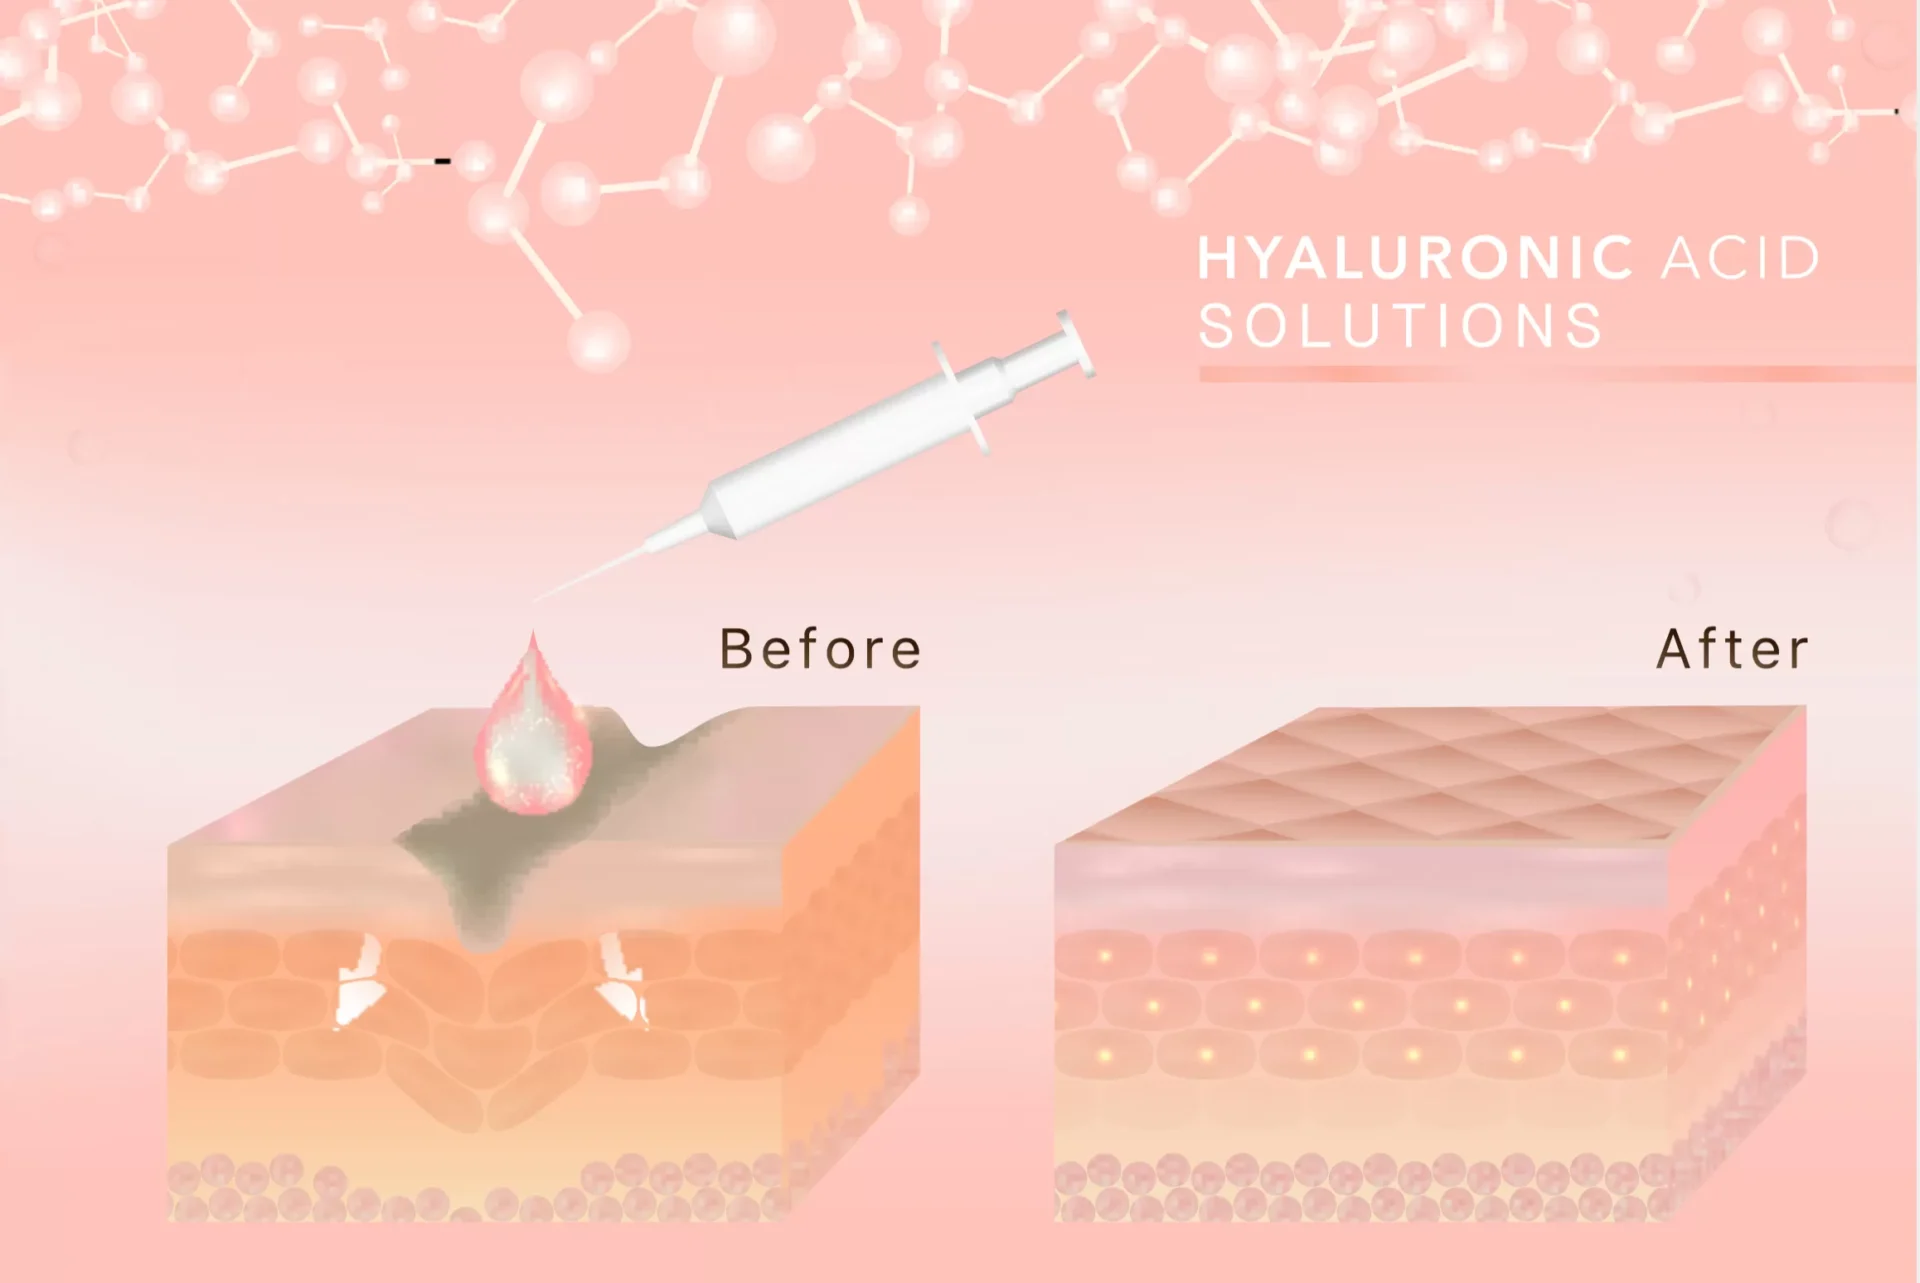 Hyaluronic Acid Products Market Is Estimated To Witness High Growth Owing To Increasing Demand for Dermal Fillers and Rising Geriatric Population